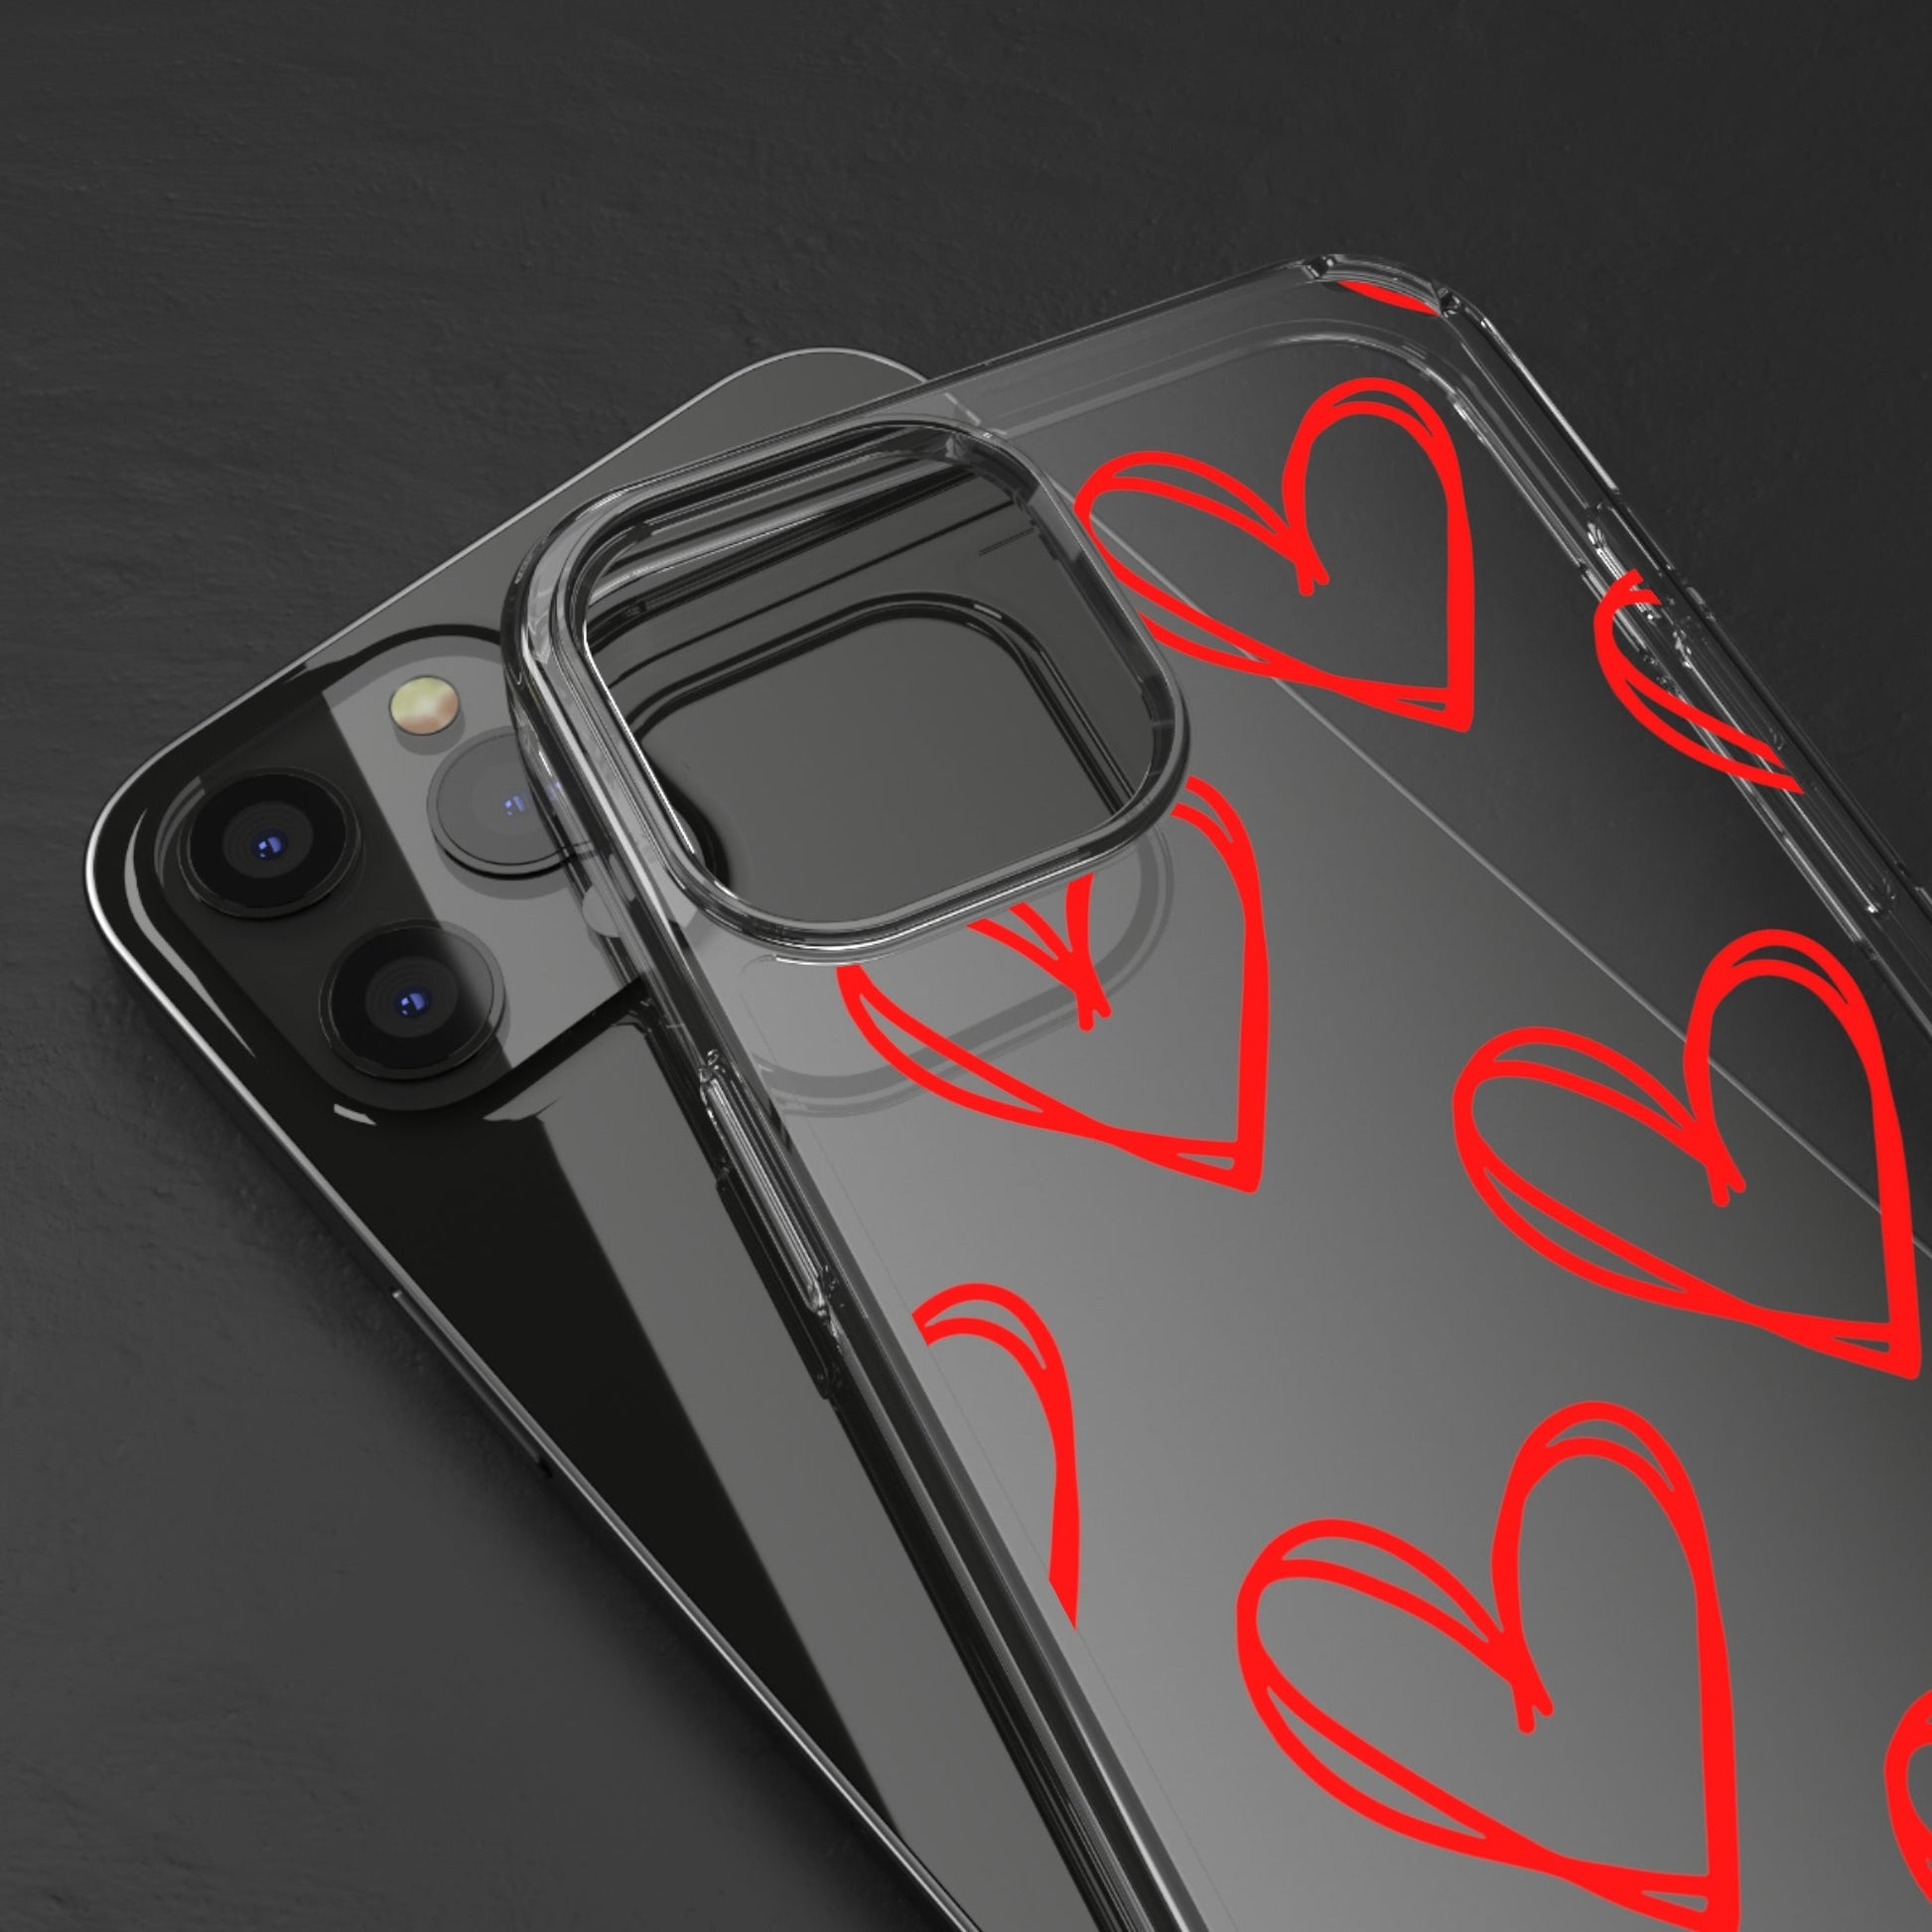 Couple Heart Clear Case - Classy Cases - Phone Case - iPhone 12 Pro Max - With gift packaging -